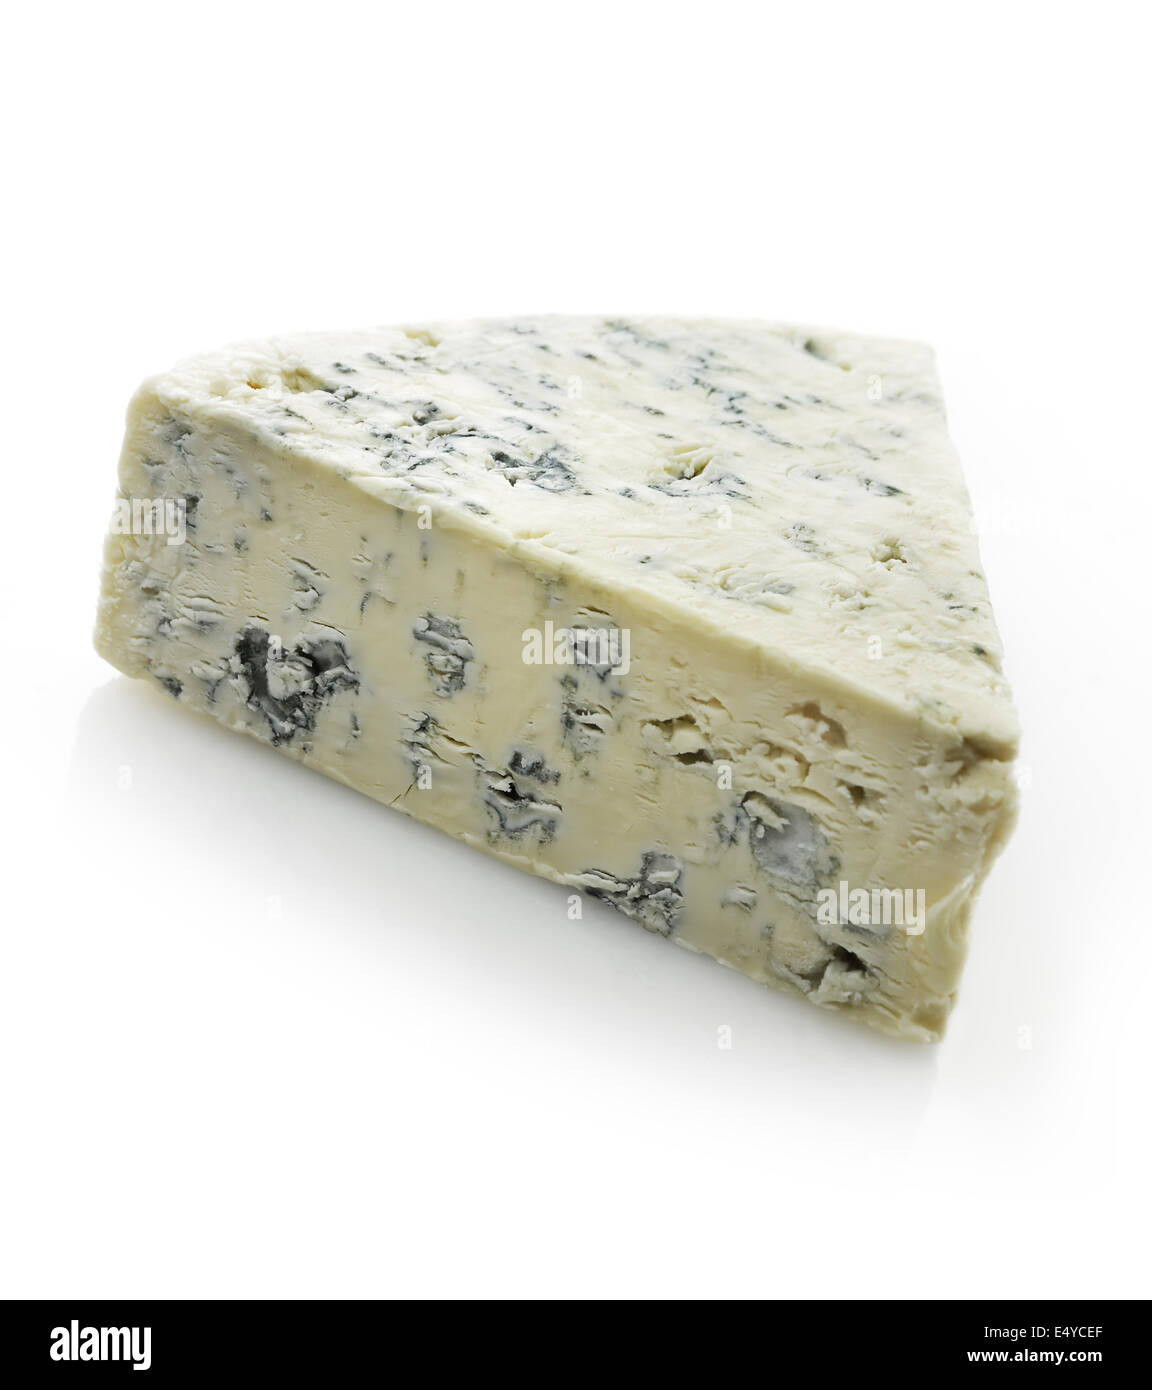 Wedge of Blue Cheese Stock Photo